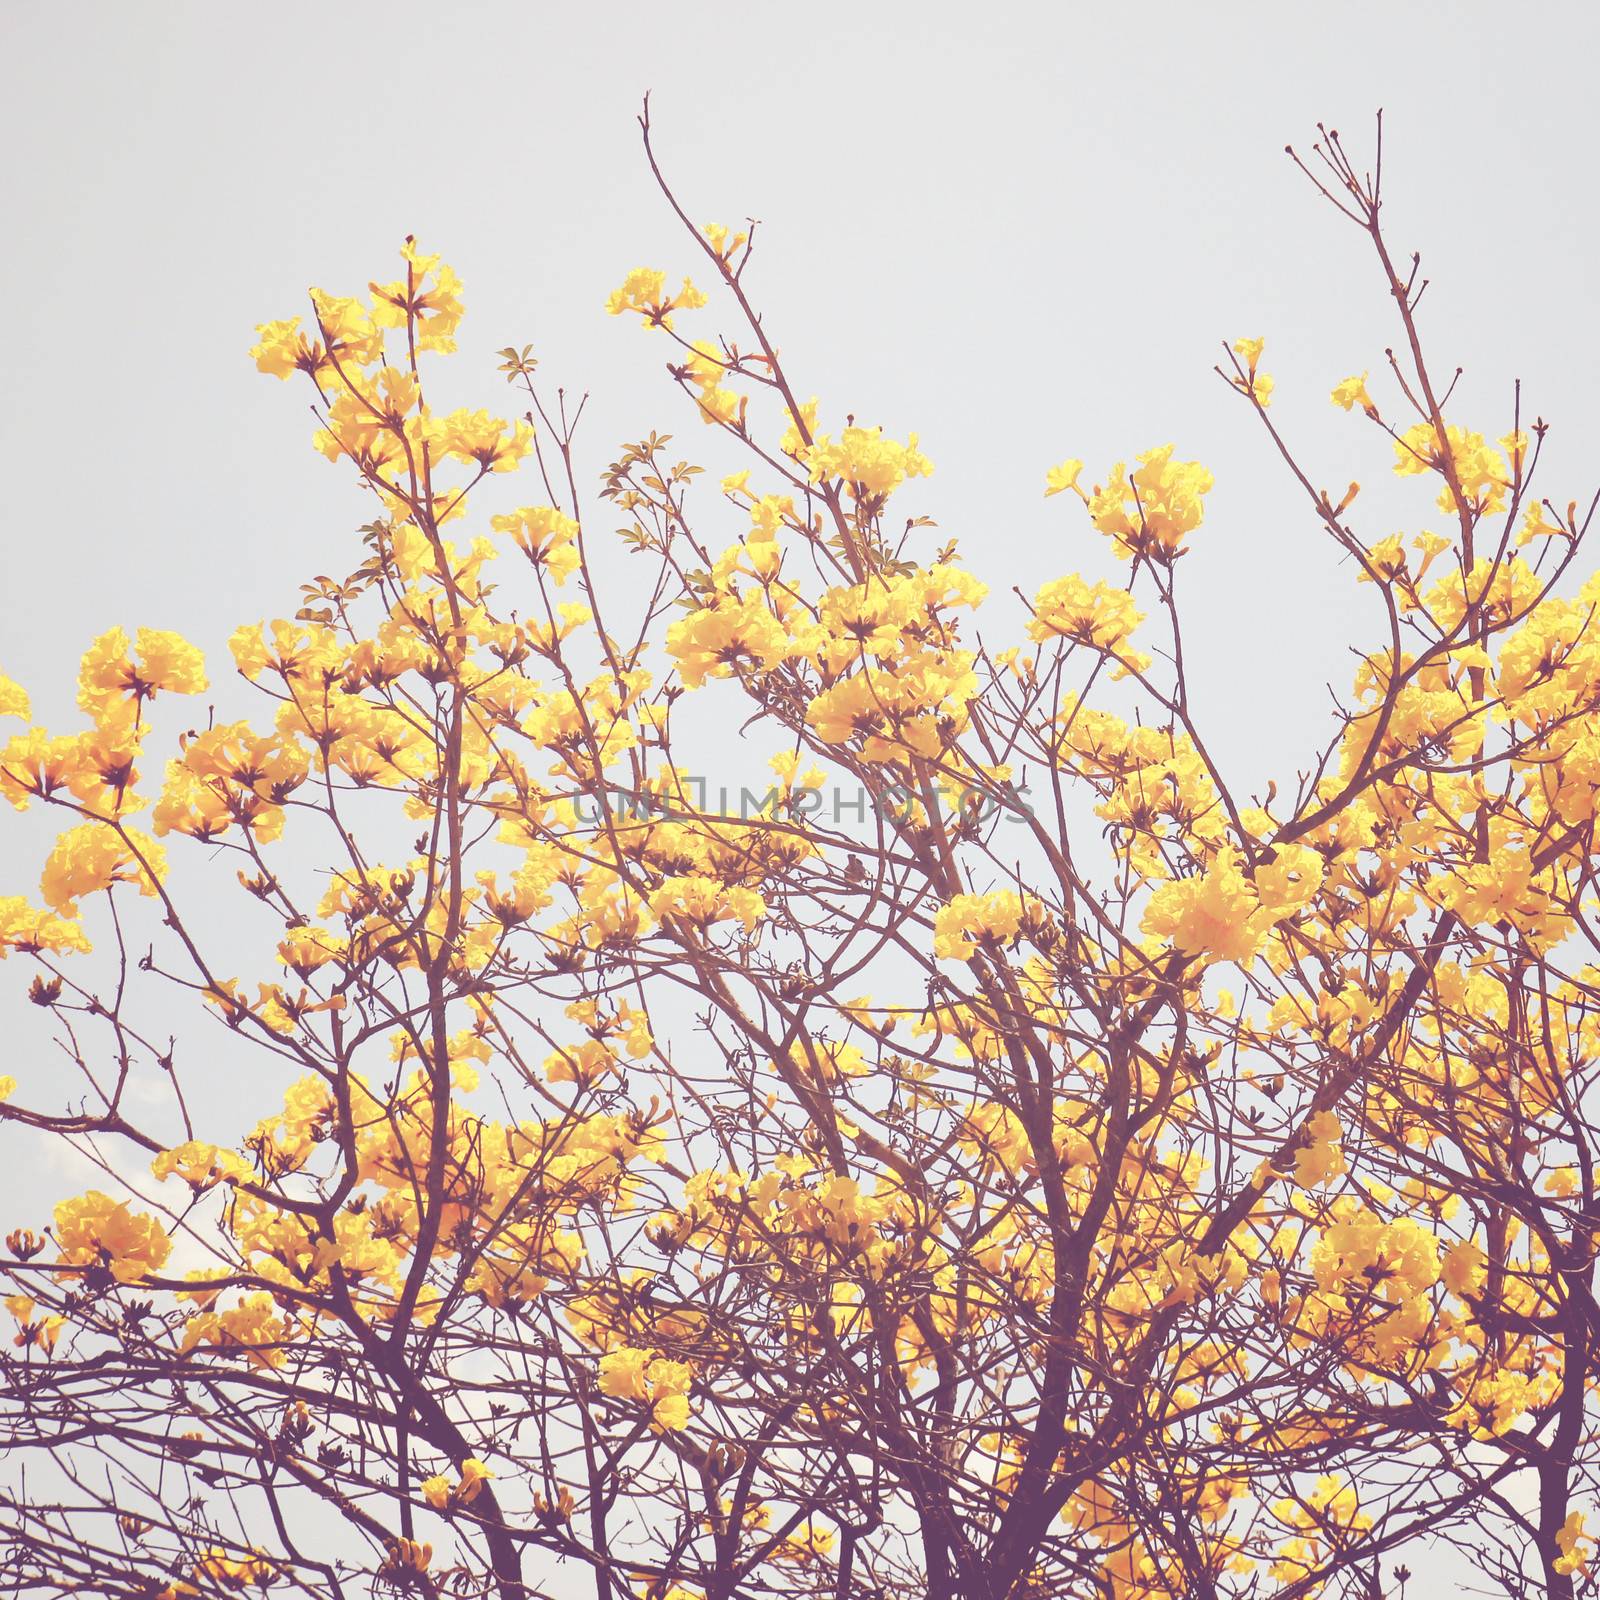 Yellow flower on the top of tree with retro filter effect 